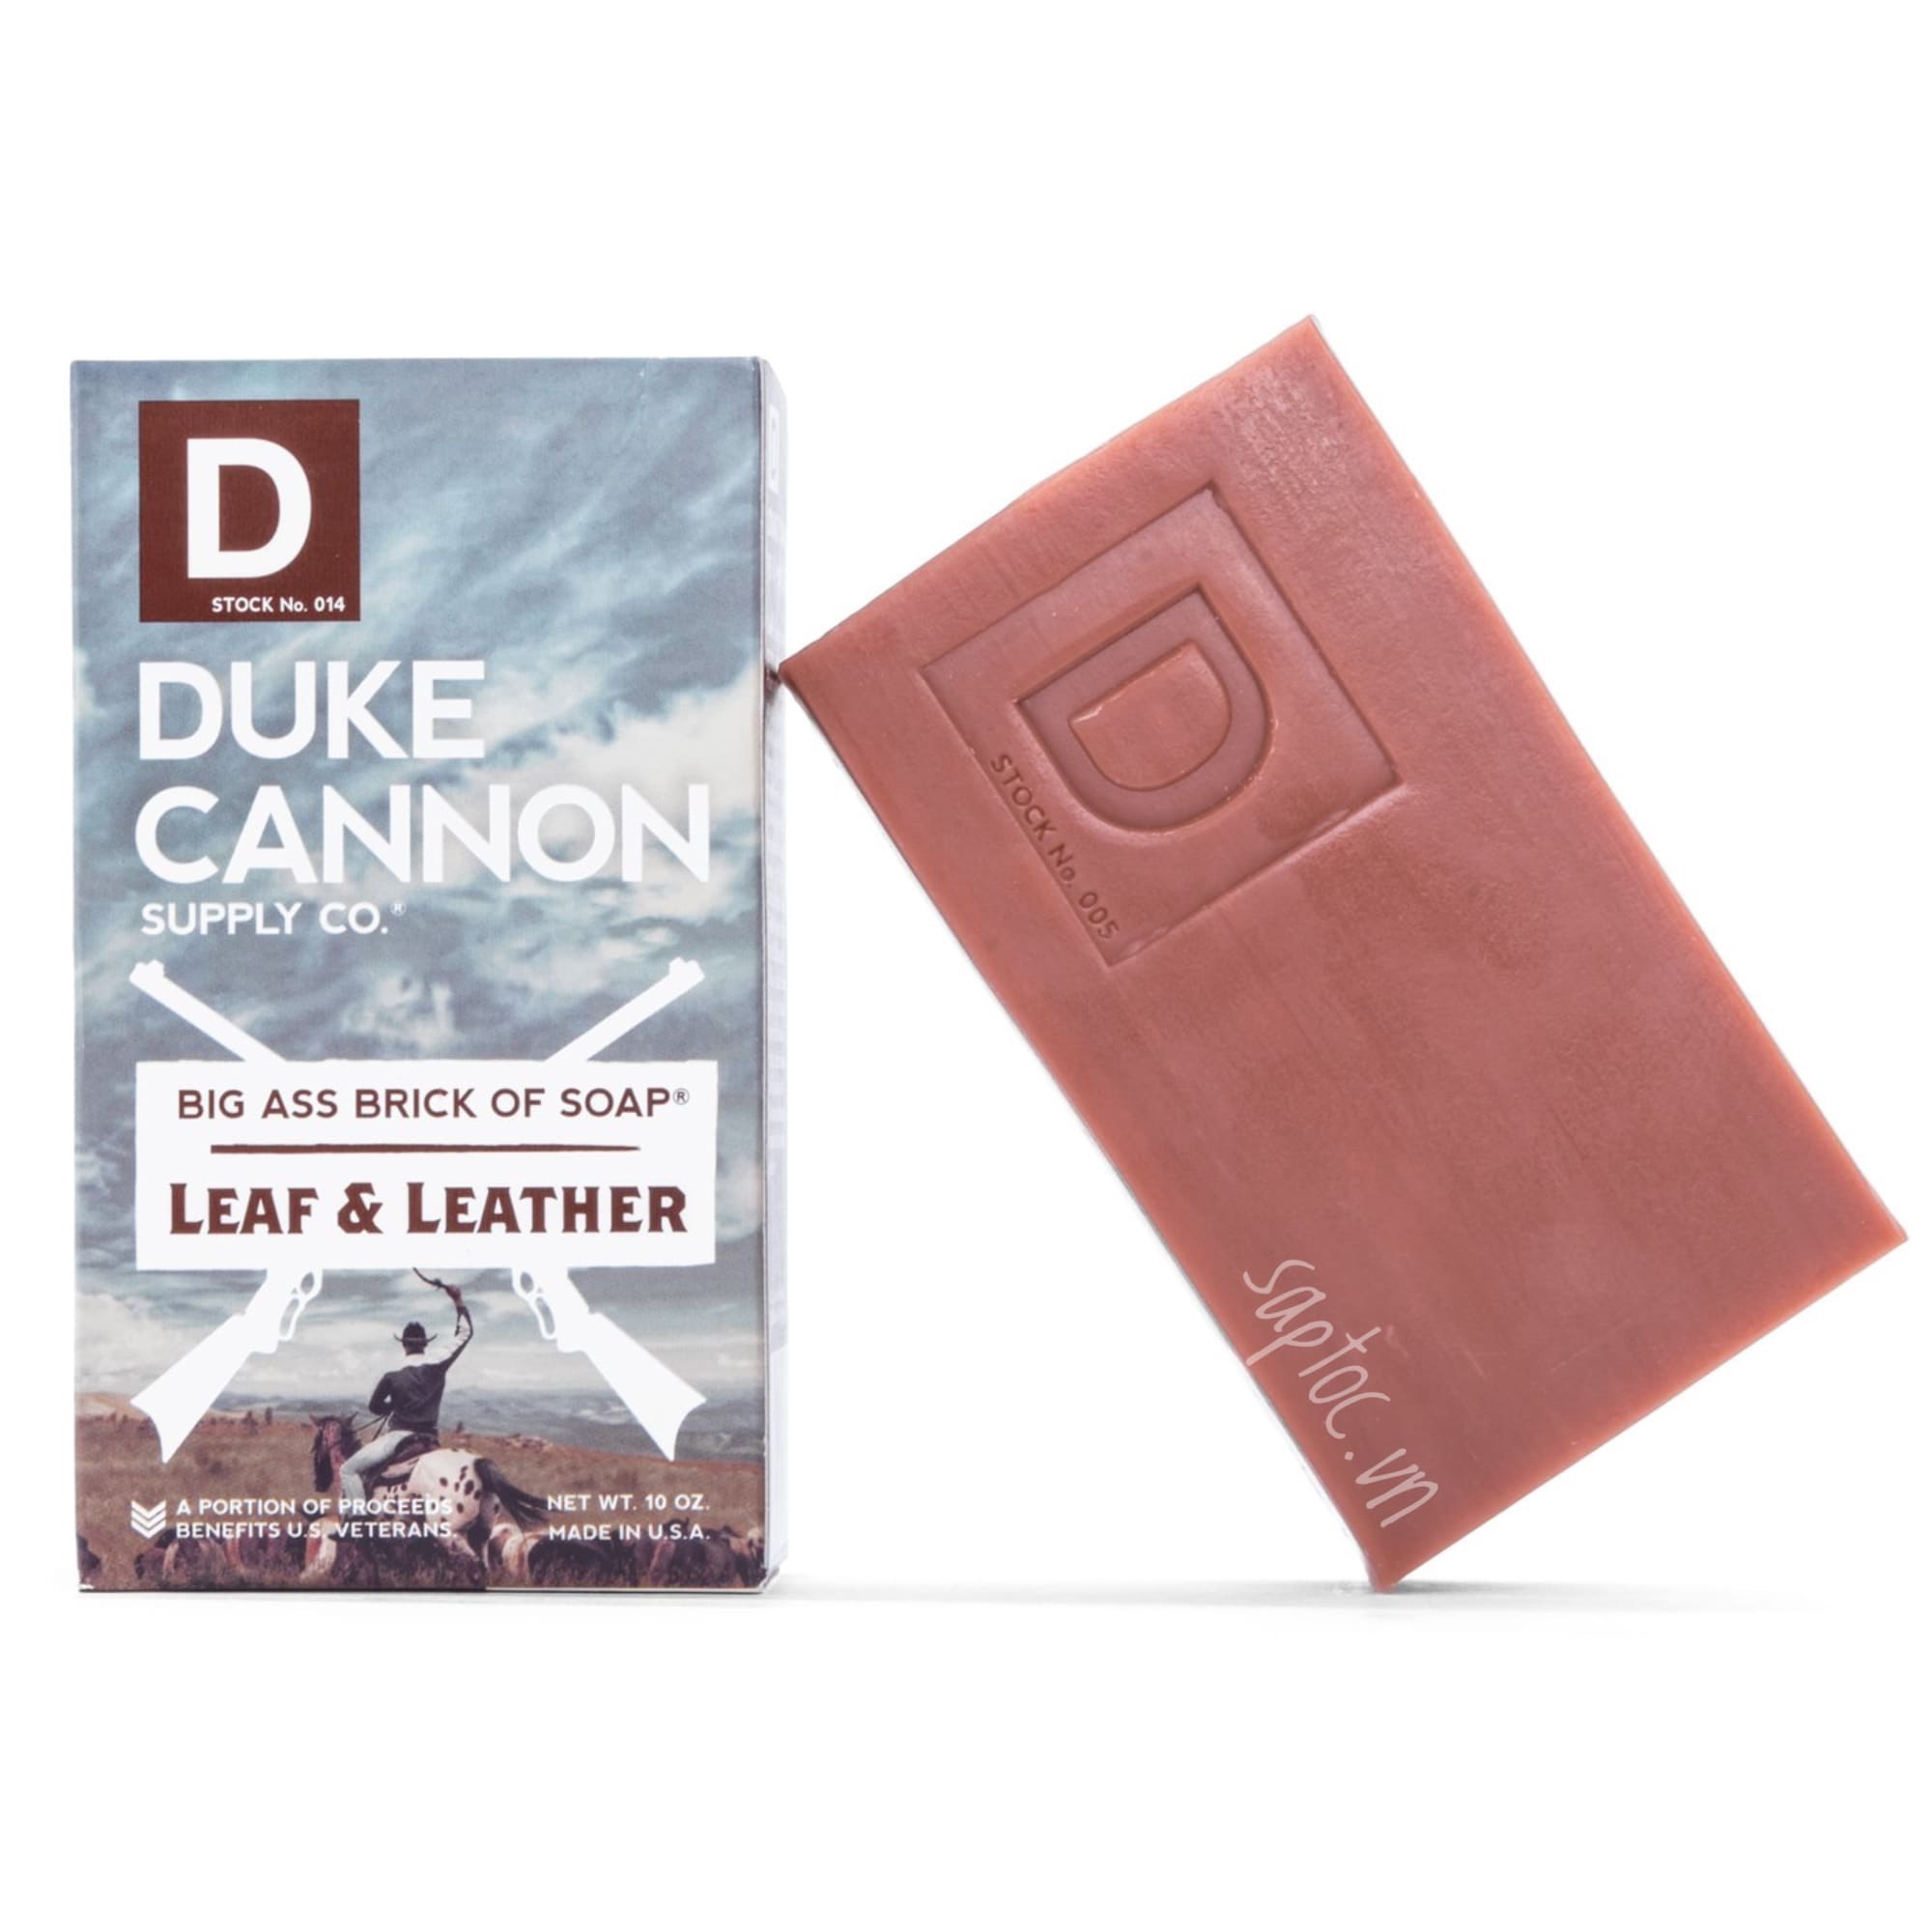 DUKE CANNON BIG ASS BRICK OF SOAP - LEAF AND LEATHER